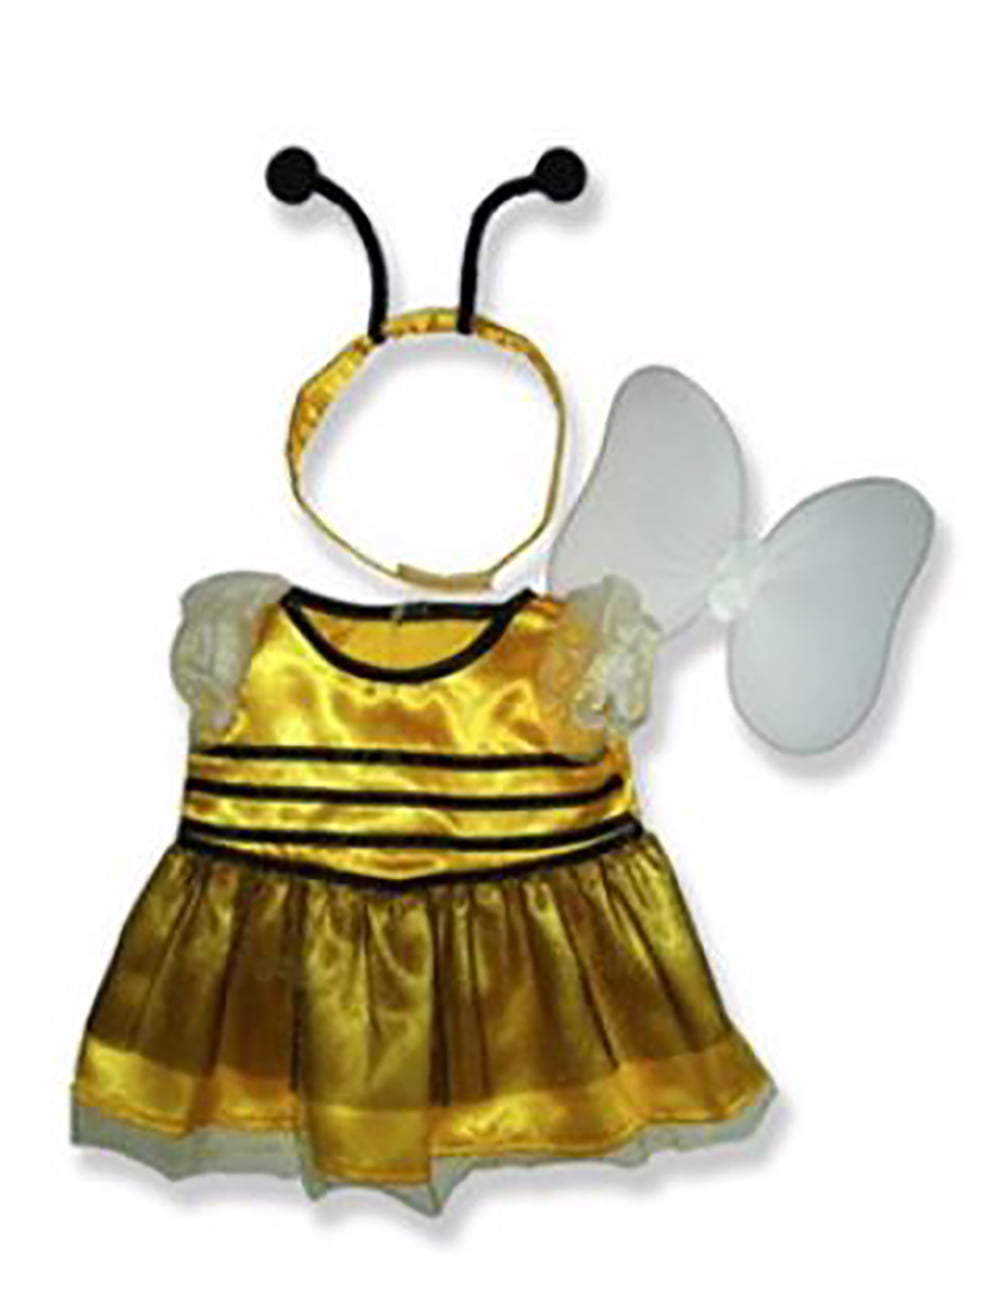 Bumble Bee Outfit Teddy Bear Clothes Fits Most 14" 18" Build-a-bear and Make Y 